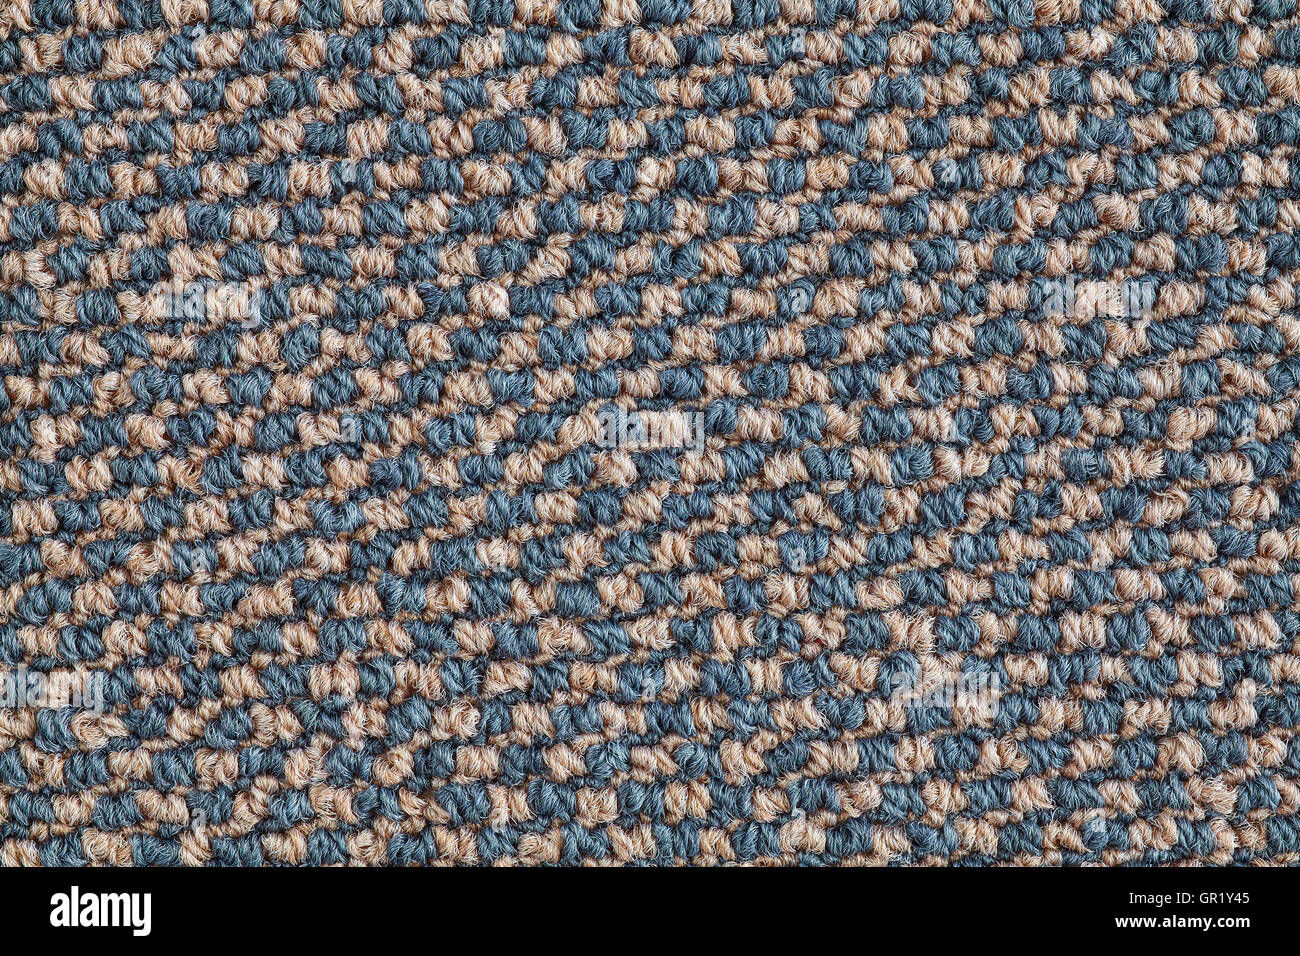 High quality close up picture of a carpet fabric texture Stock Photo ...